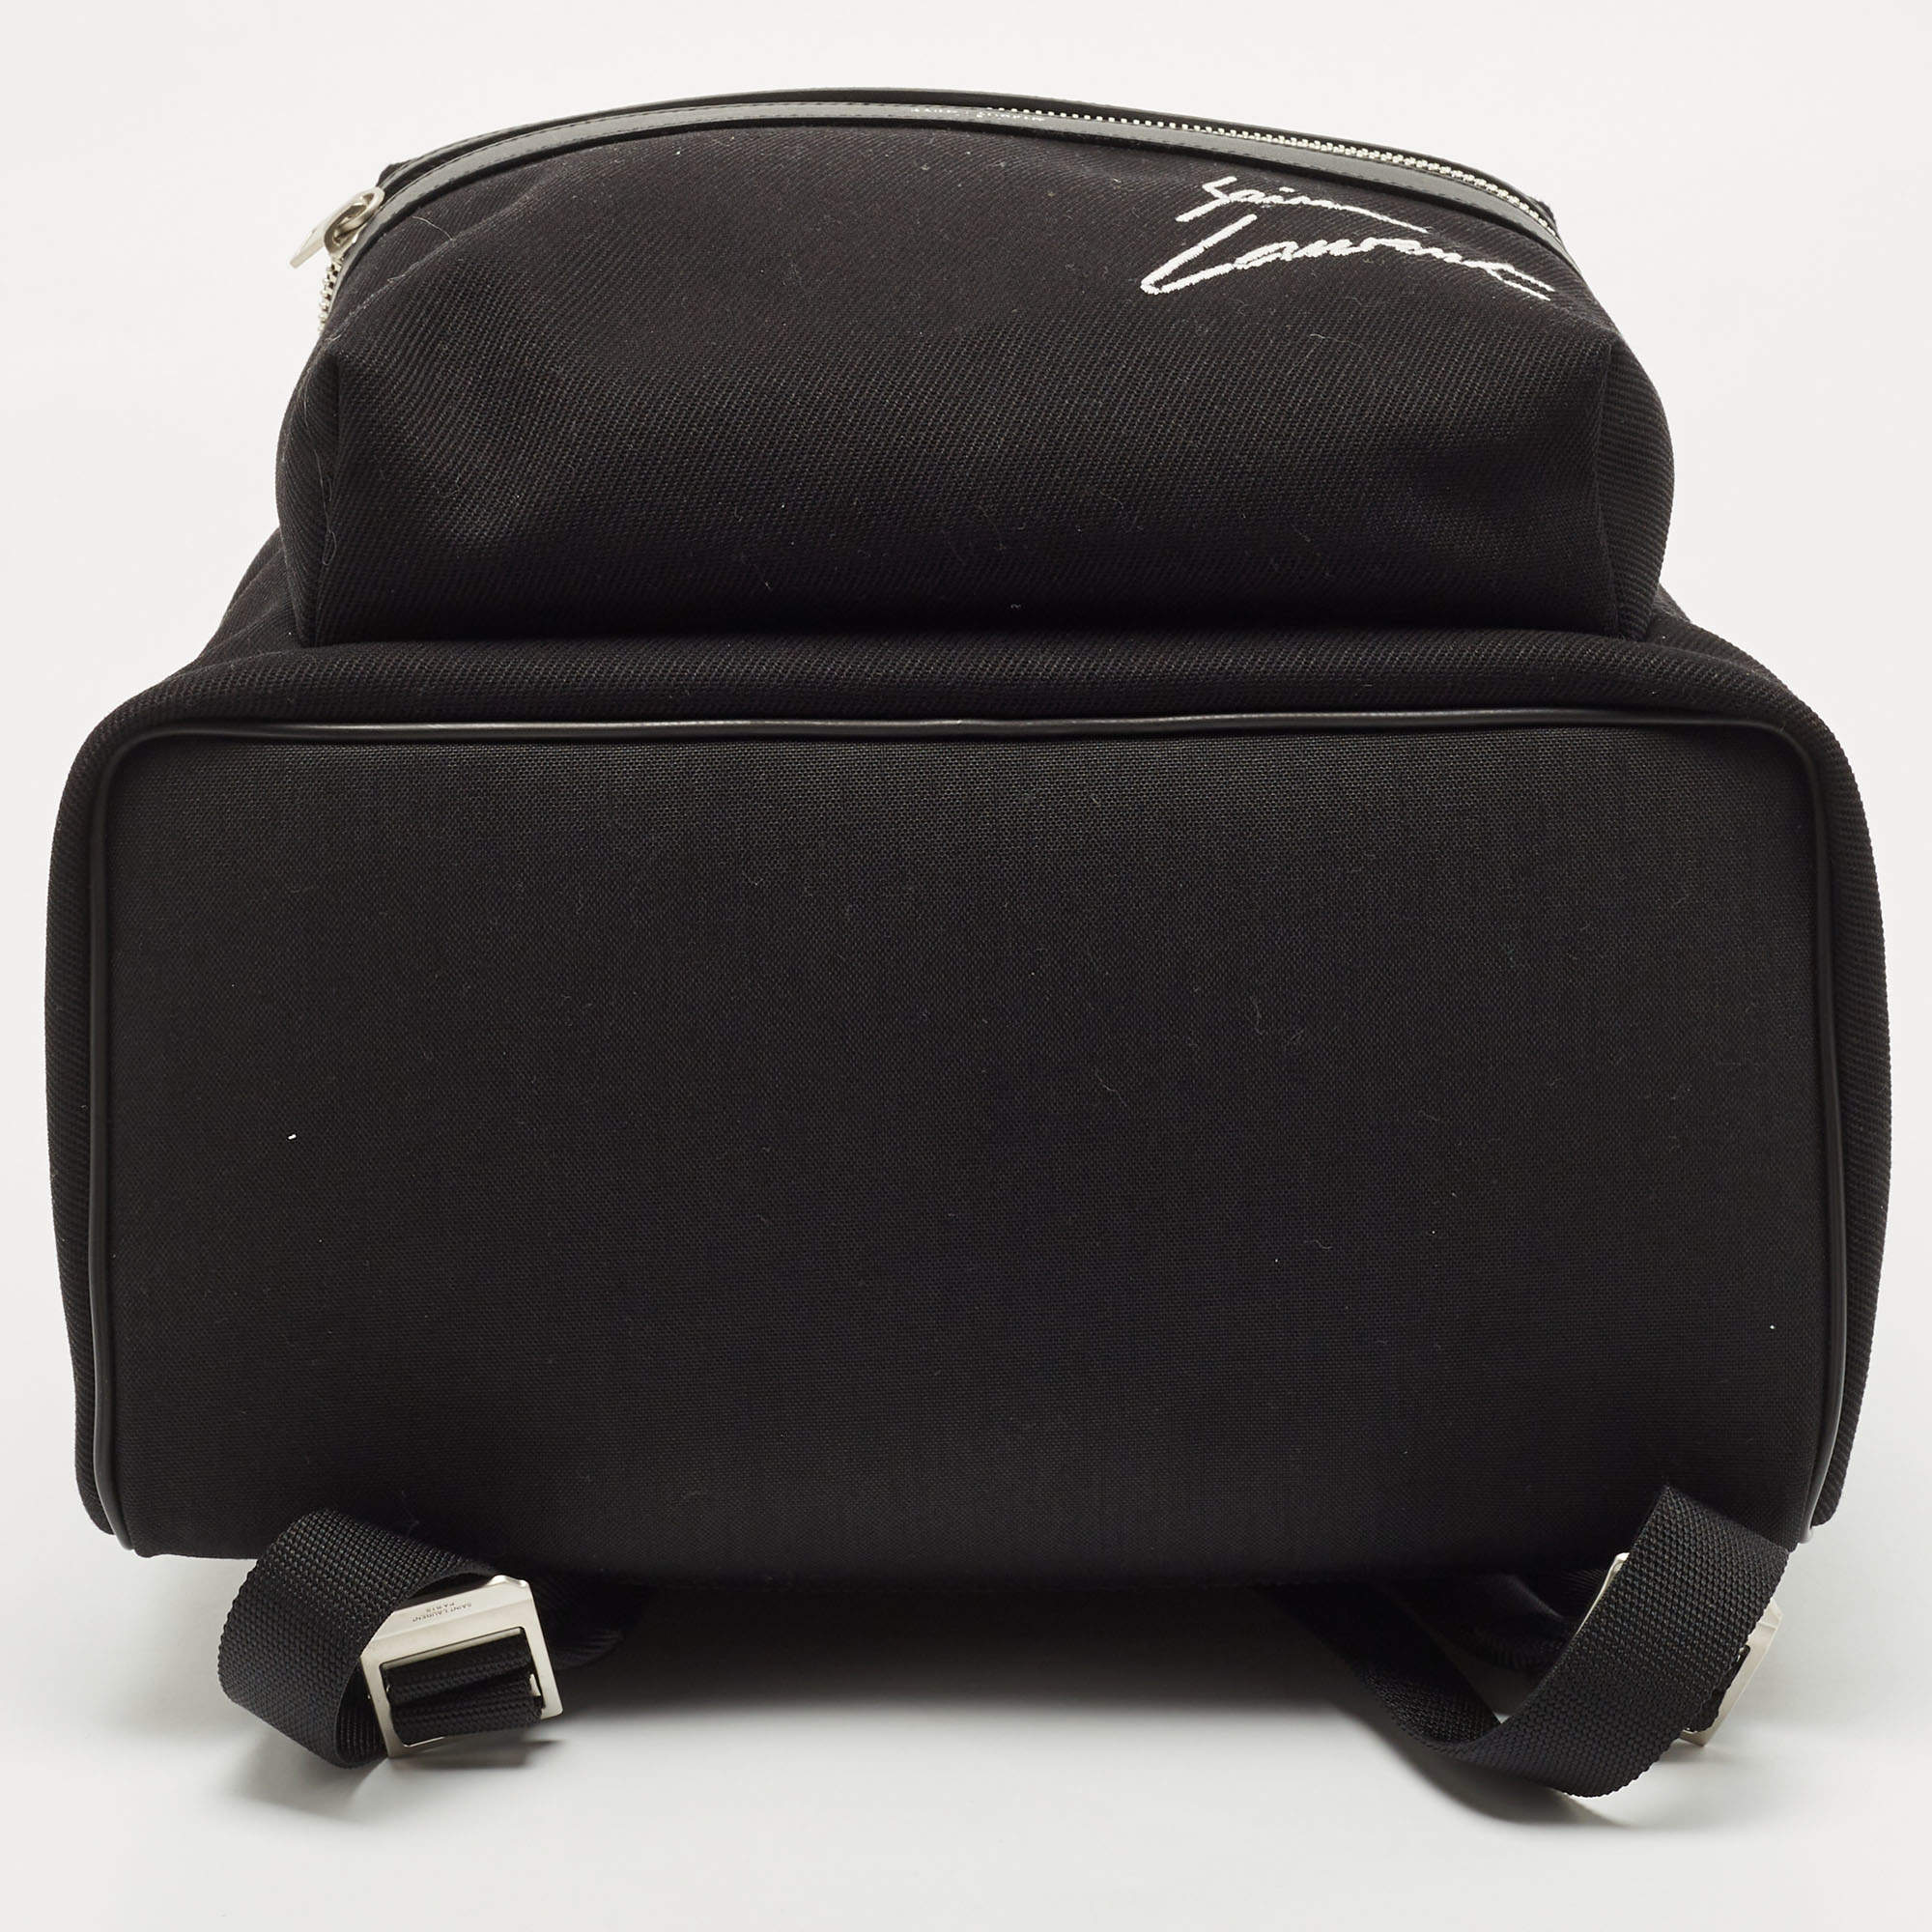 Saint Laurent Toy-city embroidered mini leather backpack